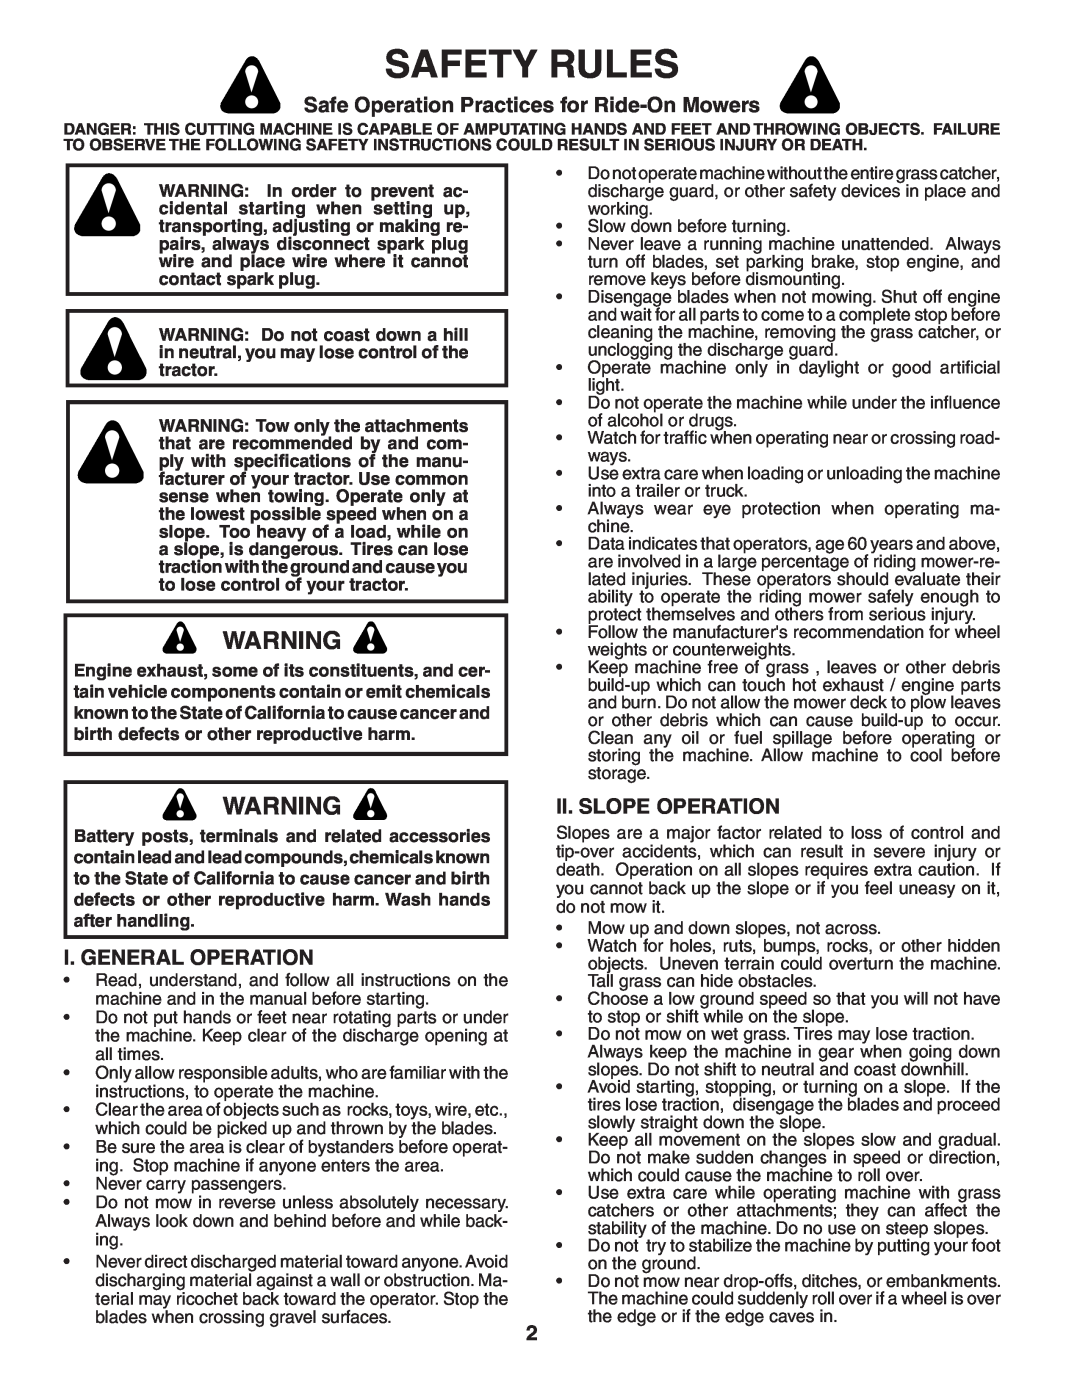 Poulan 402993 manual Safety Rules, Safe Operation Practices for Ride-On Mowers, I. General Operation, Ii. Slope Operation 